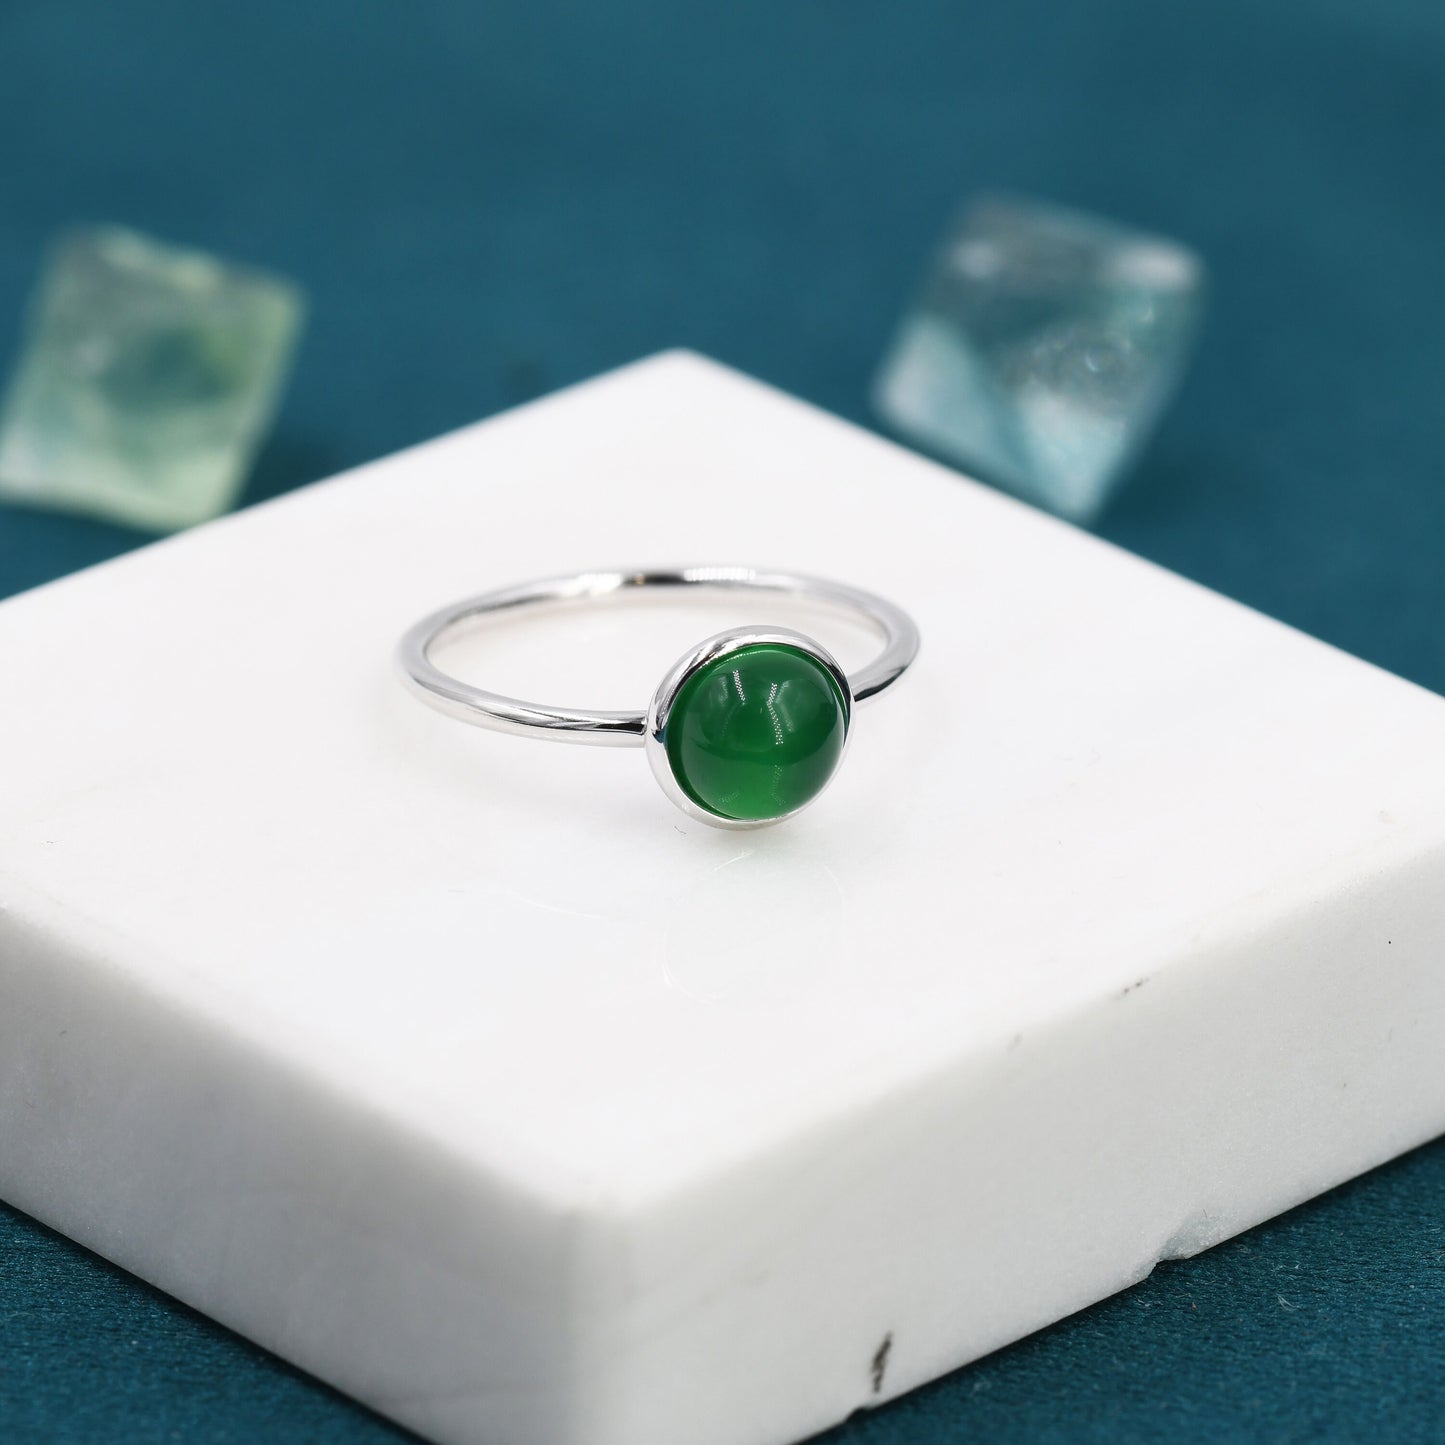 Genuine Green Onyx Ring in Sterling Silver, US 5 - 8, Natural Onyx Ring, Tiny Jade Ring?6mm Onyx Stone